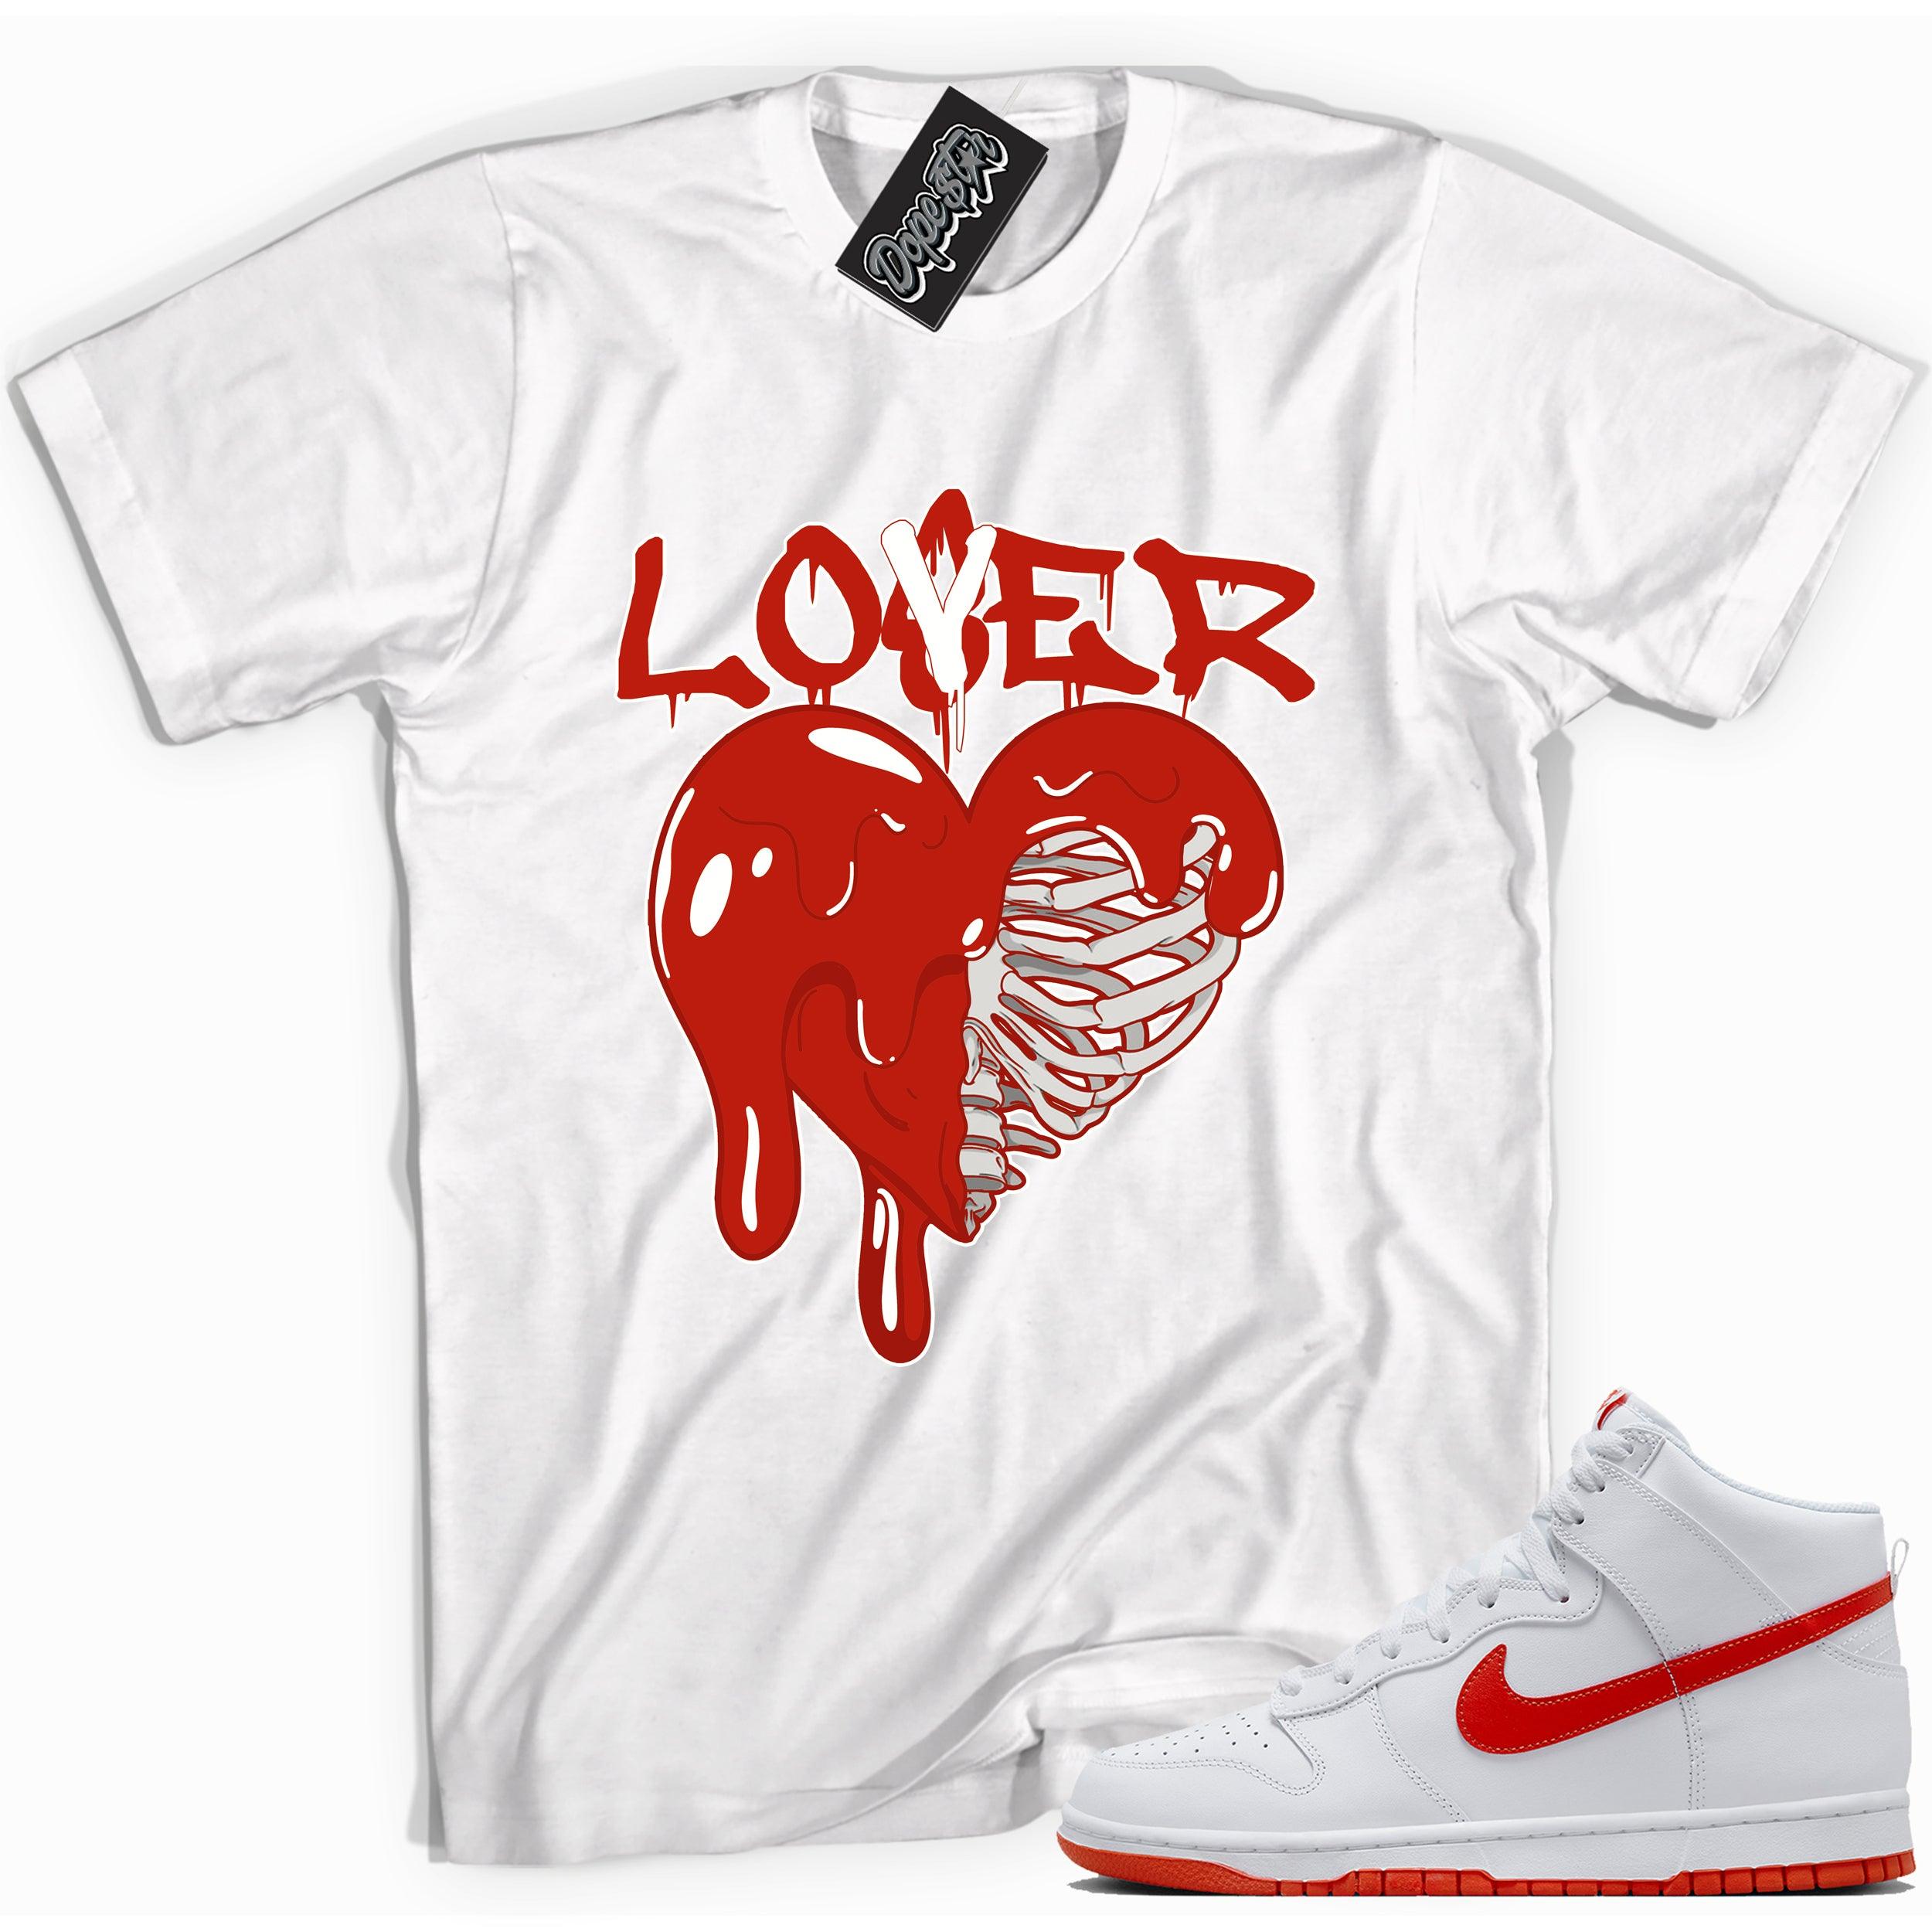 Cool white graphic tee with 'lover loser' print, that perfectly matches Nike Dunk High White Picante Red sneakers.